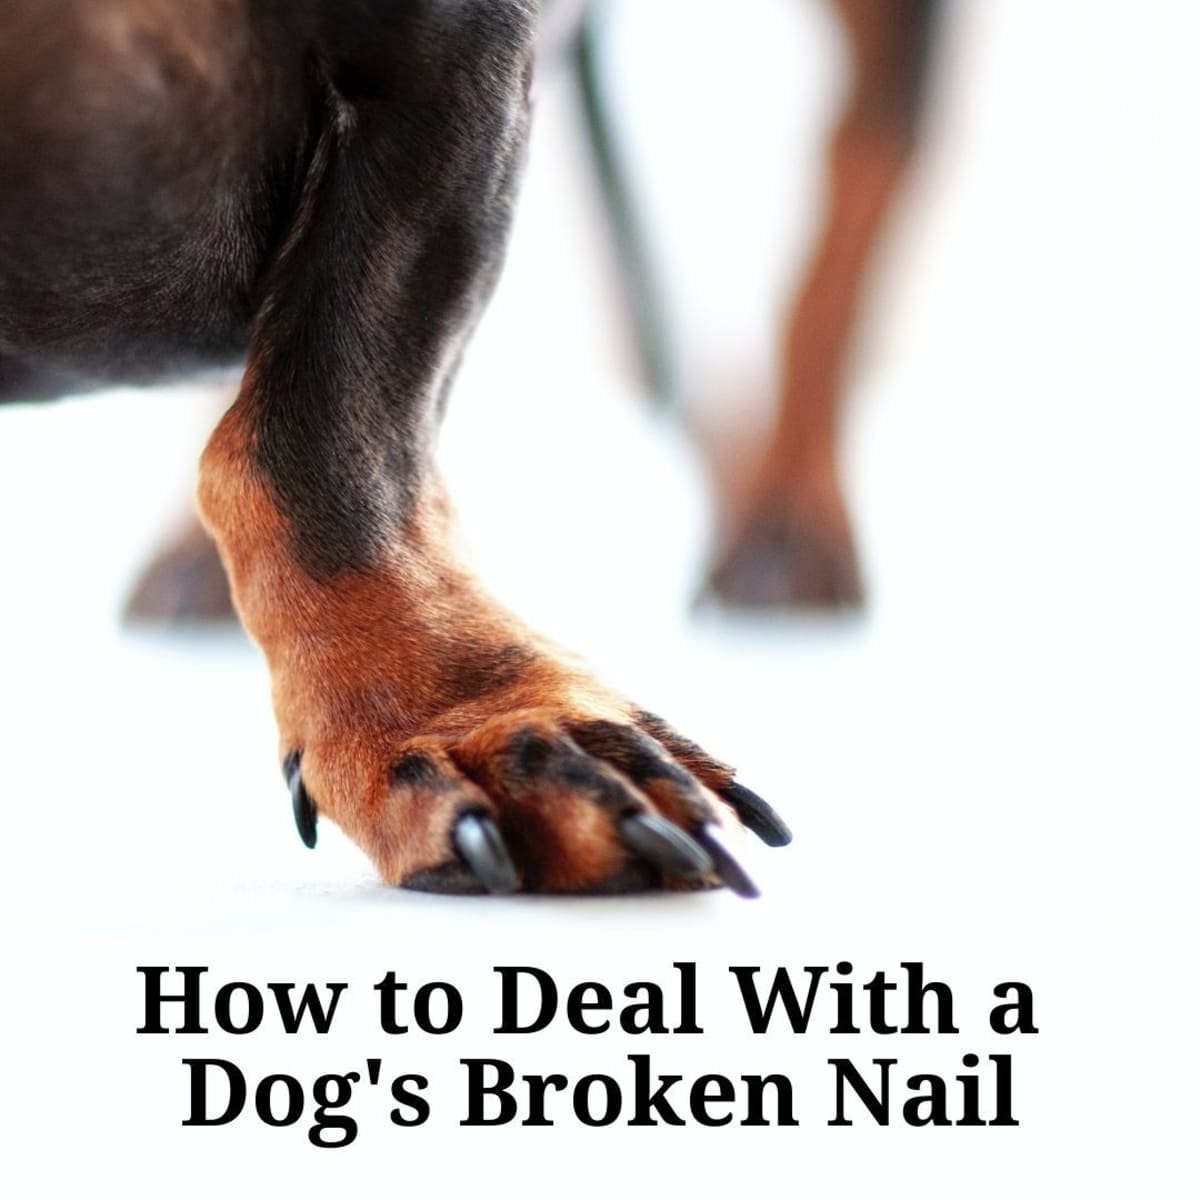 Vet-Approved Tips for Dealing With a Dog's Broken Nail - PetHelpful